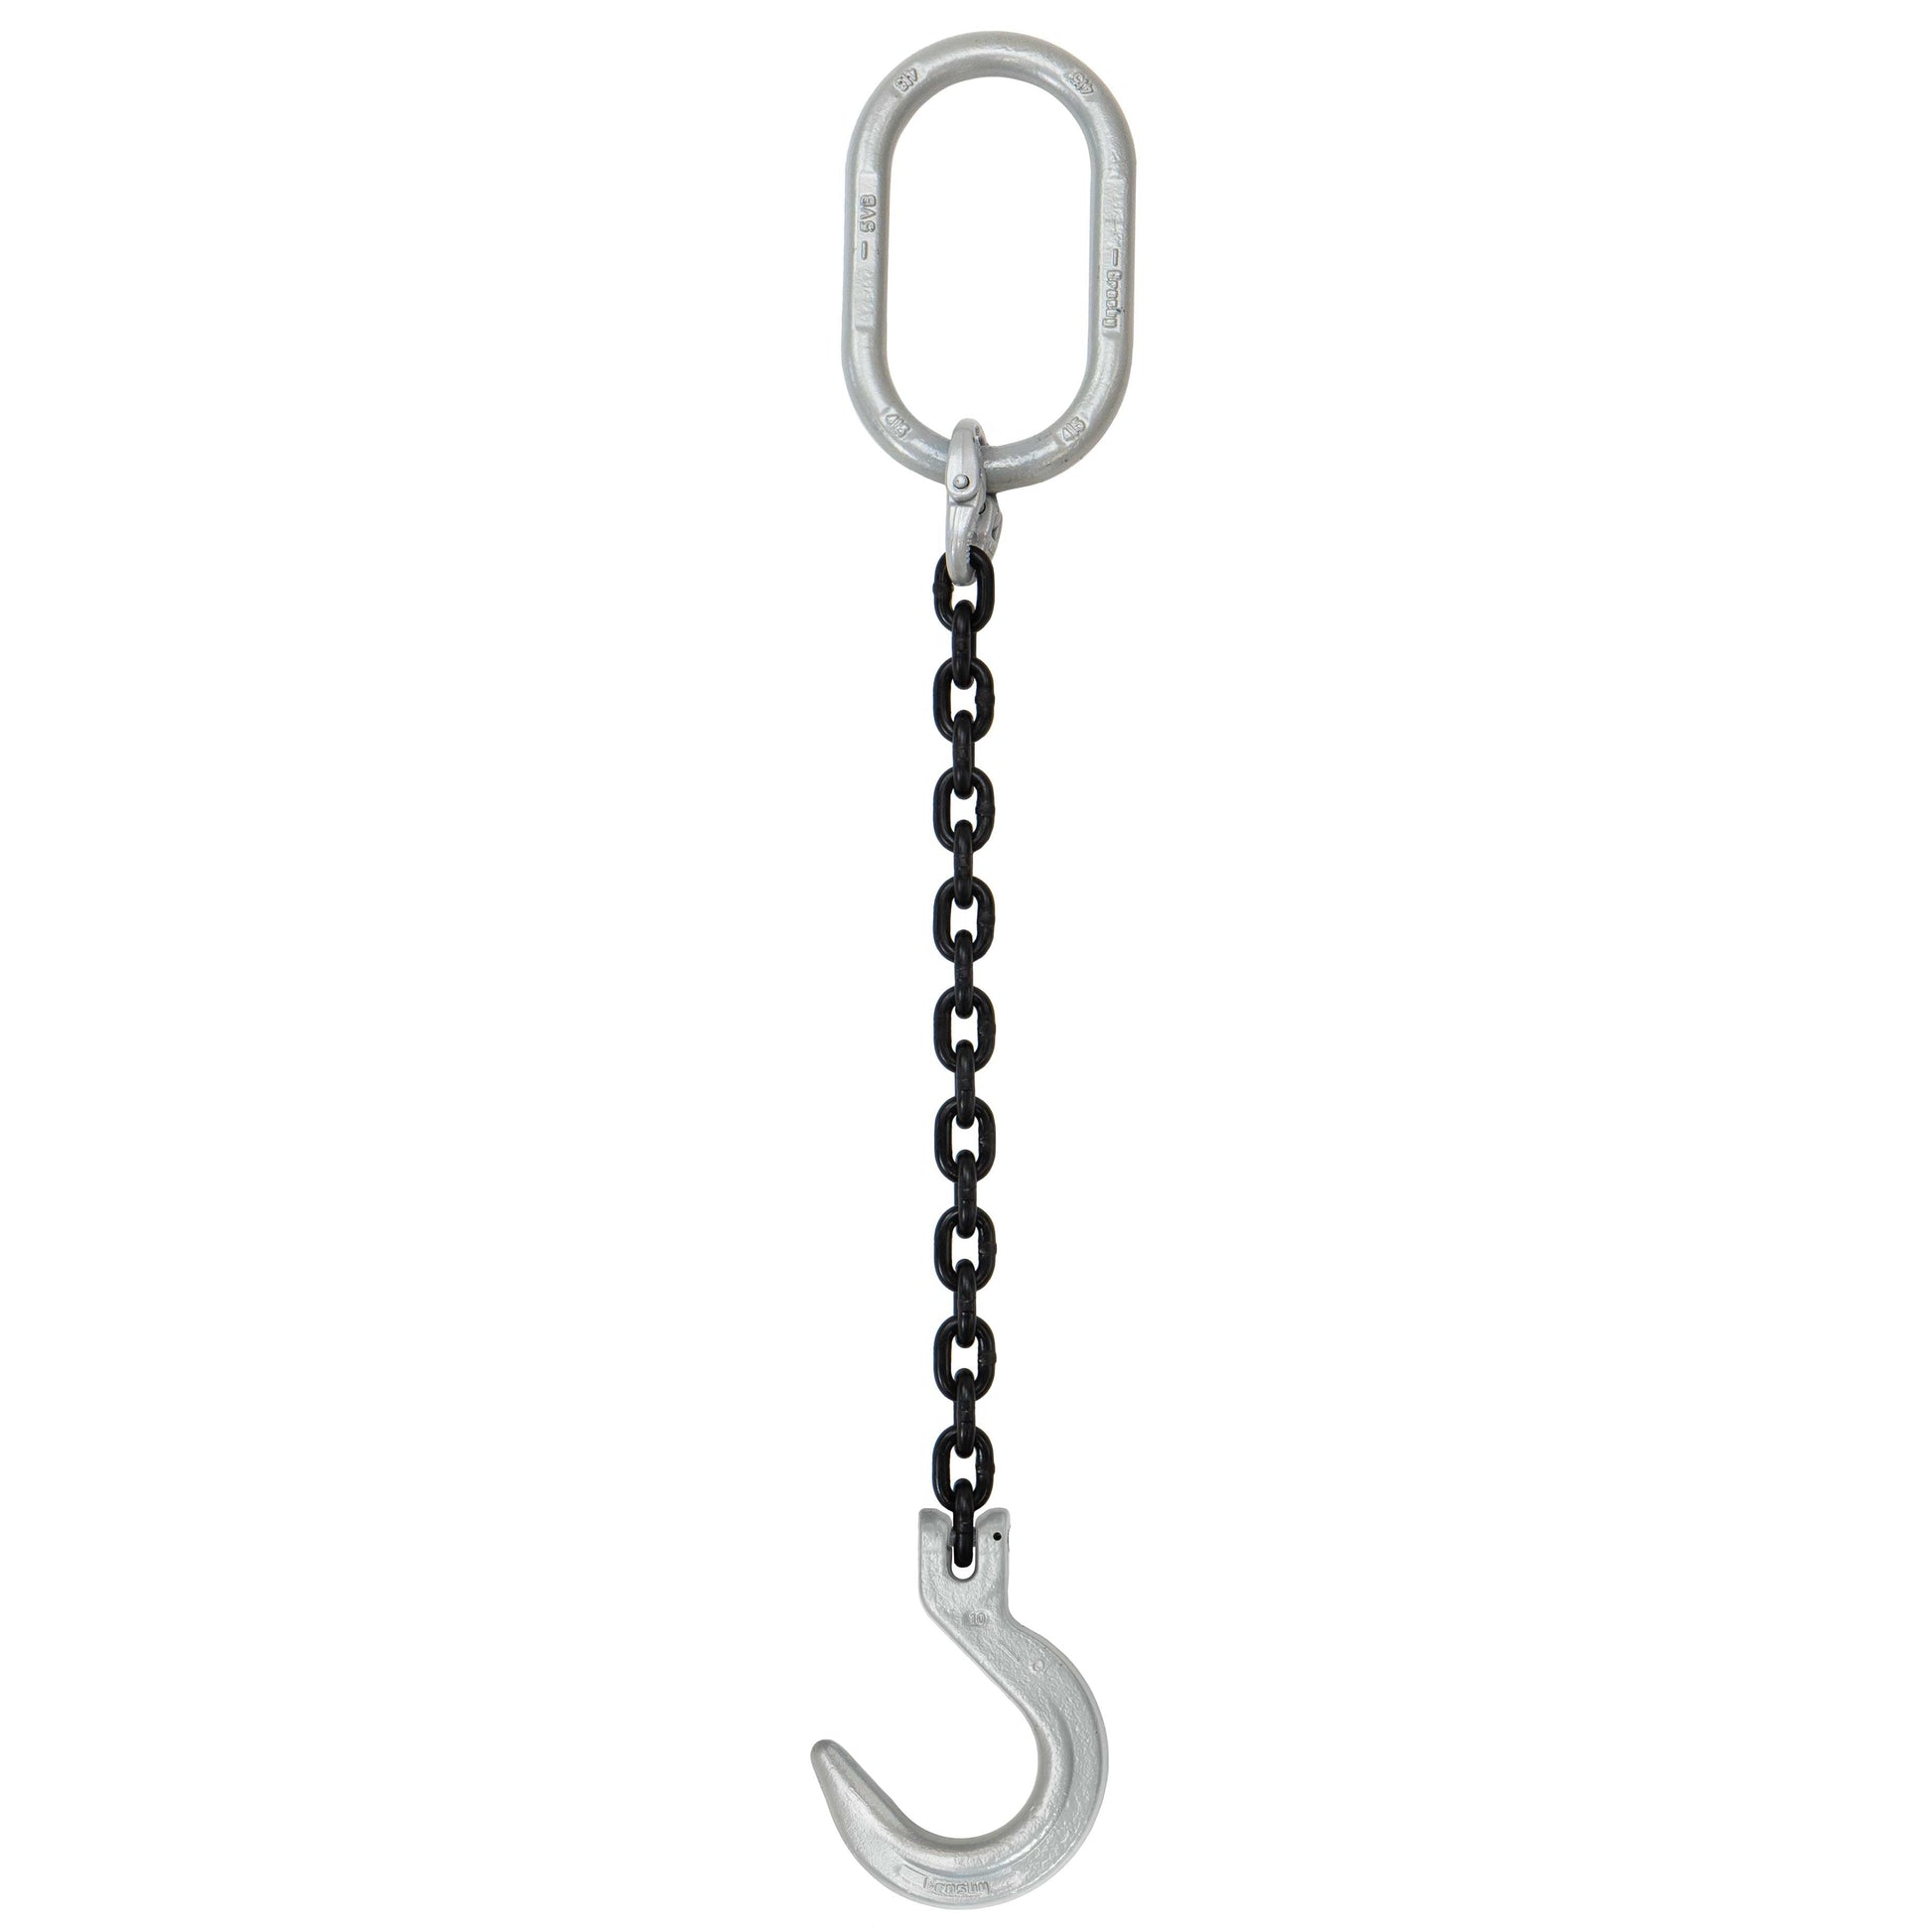 12 inch x 4 foot Domestic Single Leg Chain Sling w Crosby Foundry Hook Grade 100 image 1 of 2